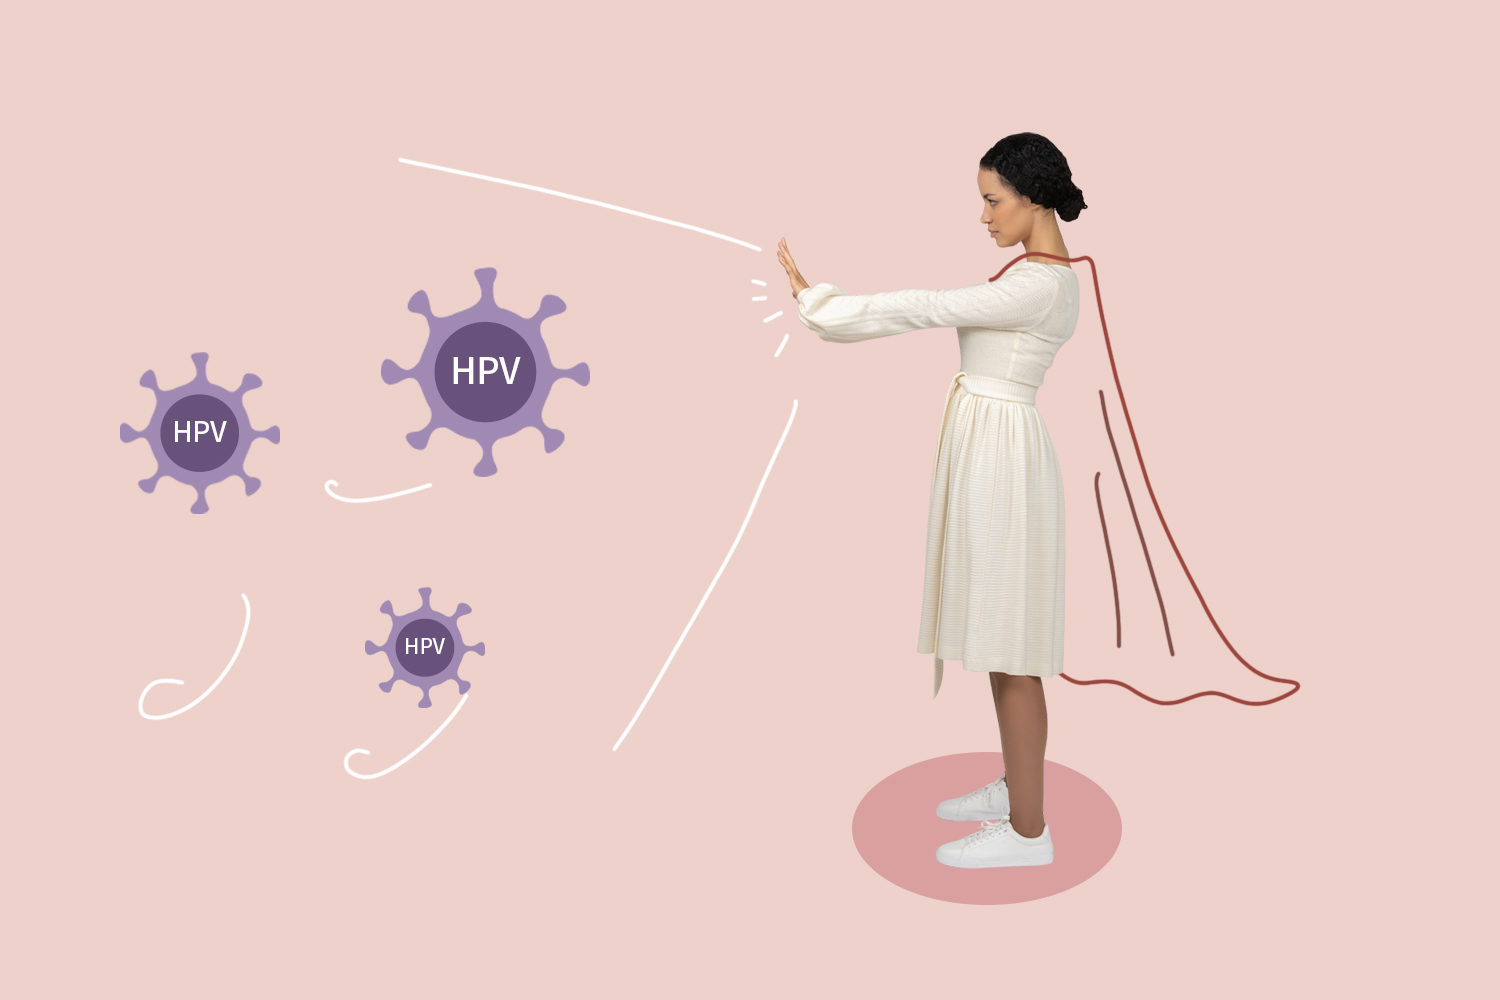 Hpv virus and pregnancy. Hpv virus can you get pregnant - coronatravel.ro